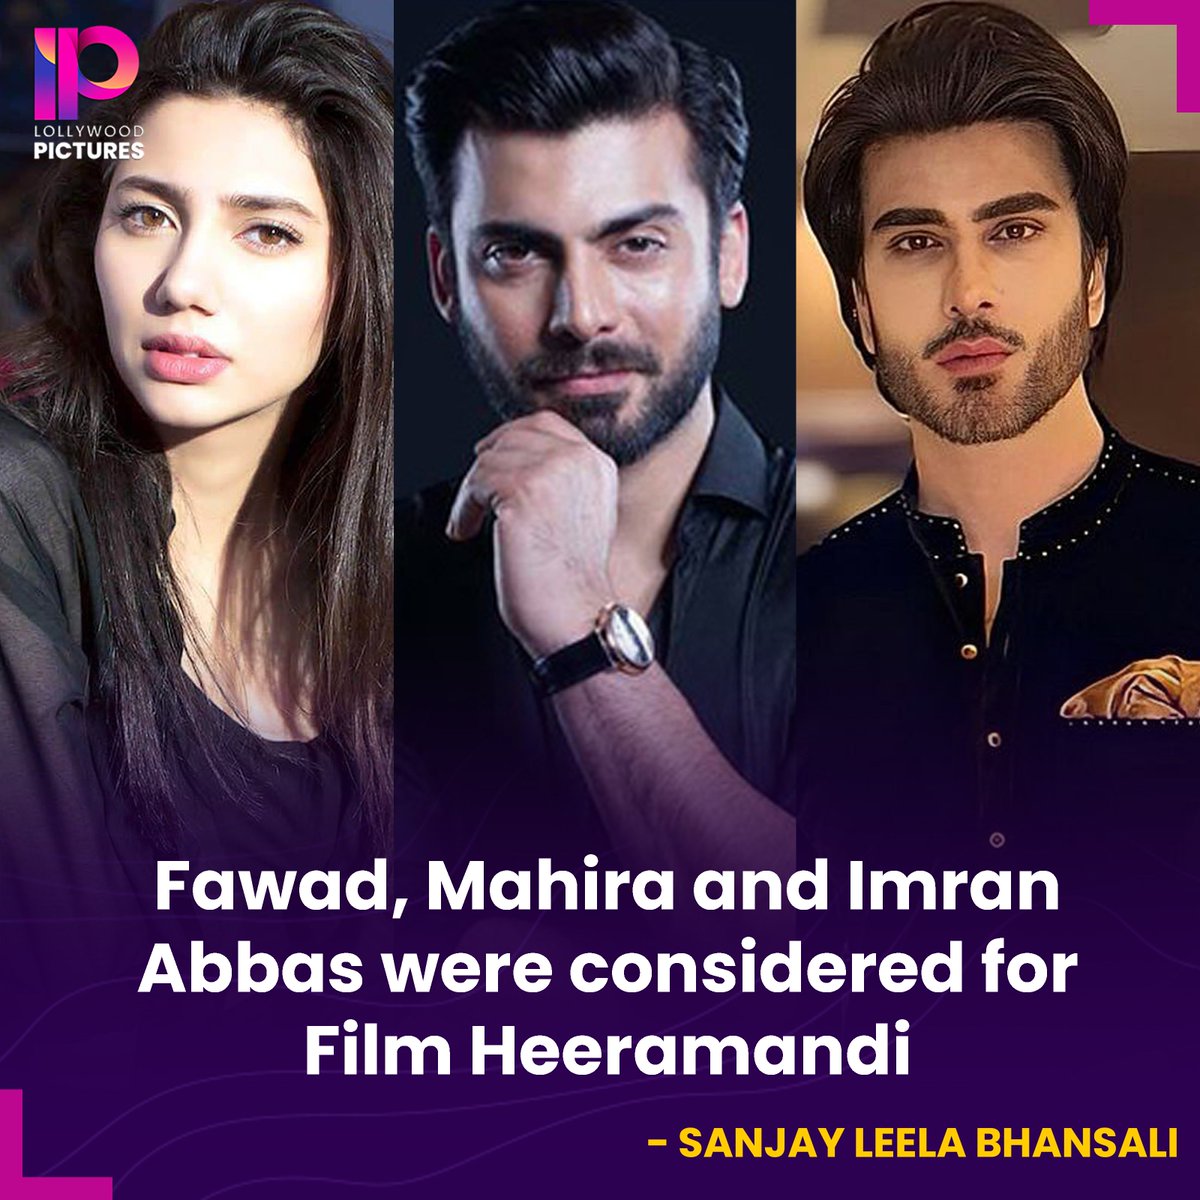 Bollywood's Veteran Film Director #SanjayLeelaBhansali mentioned in his recent interview that initially Fawad Khan, Mahira Khan and Imran Abbas were considered to play roles in his recent film #HeeraMandi. This would have been an ace choice for sure. 🙌🔥